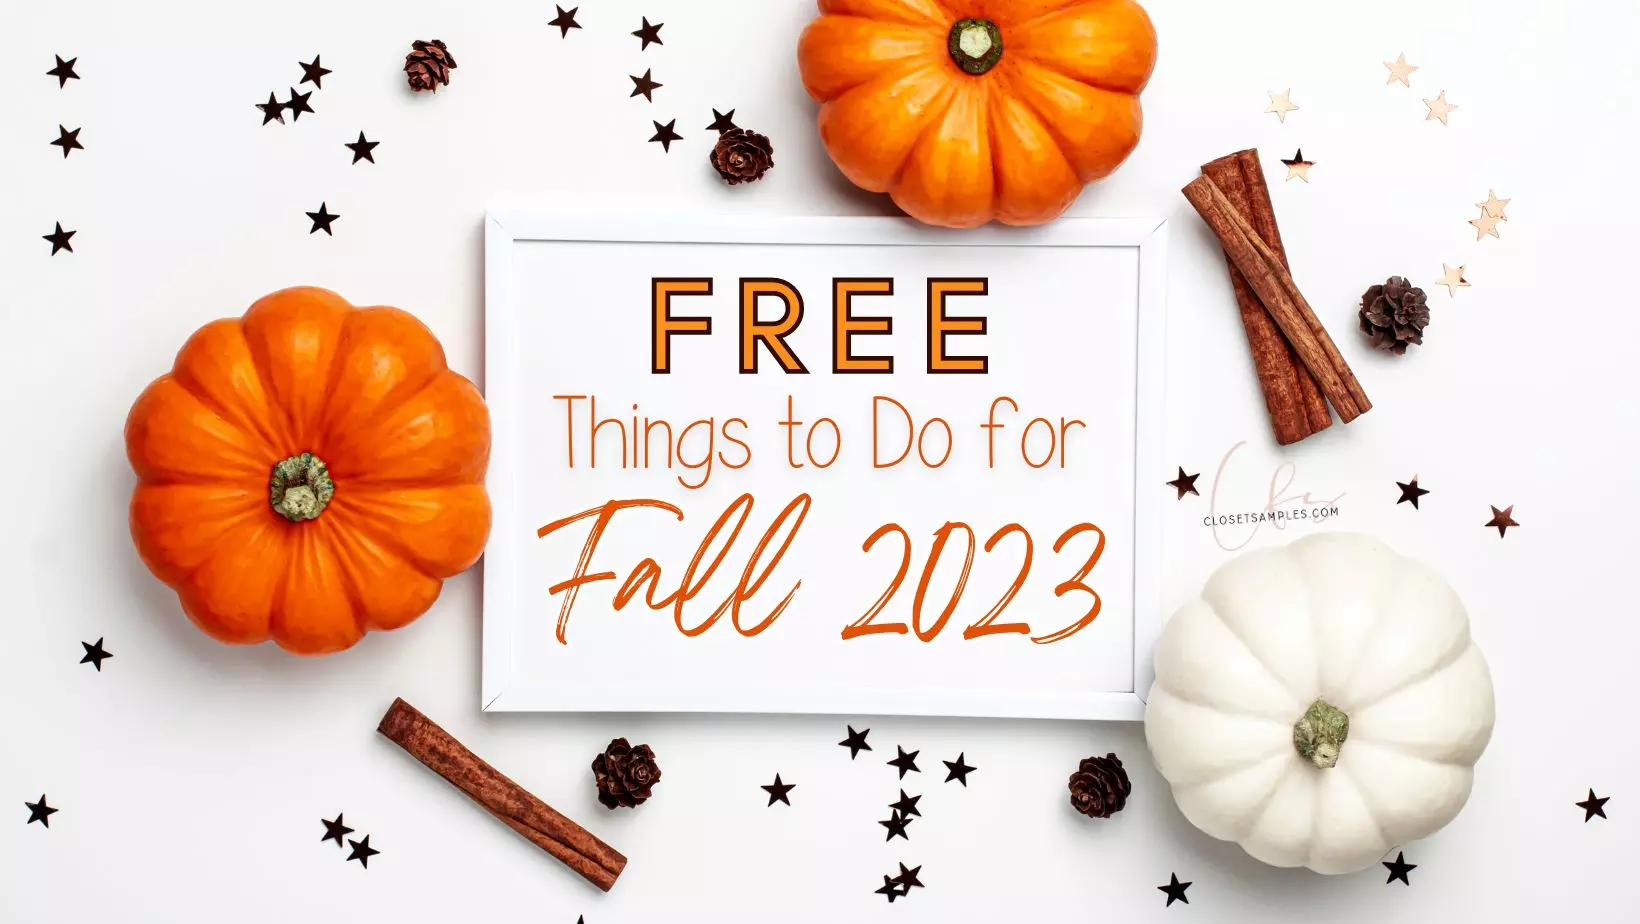 FREE Things to Do for Fall 202...